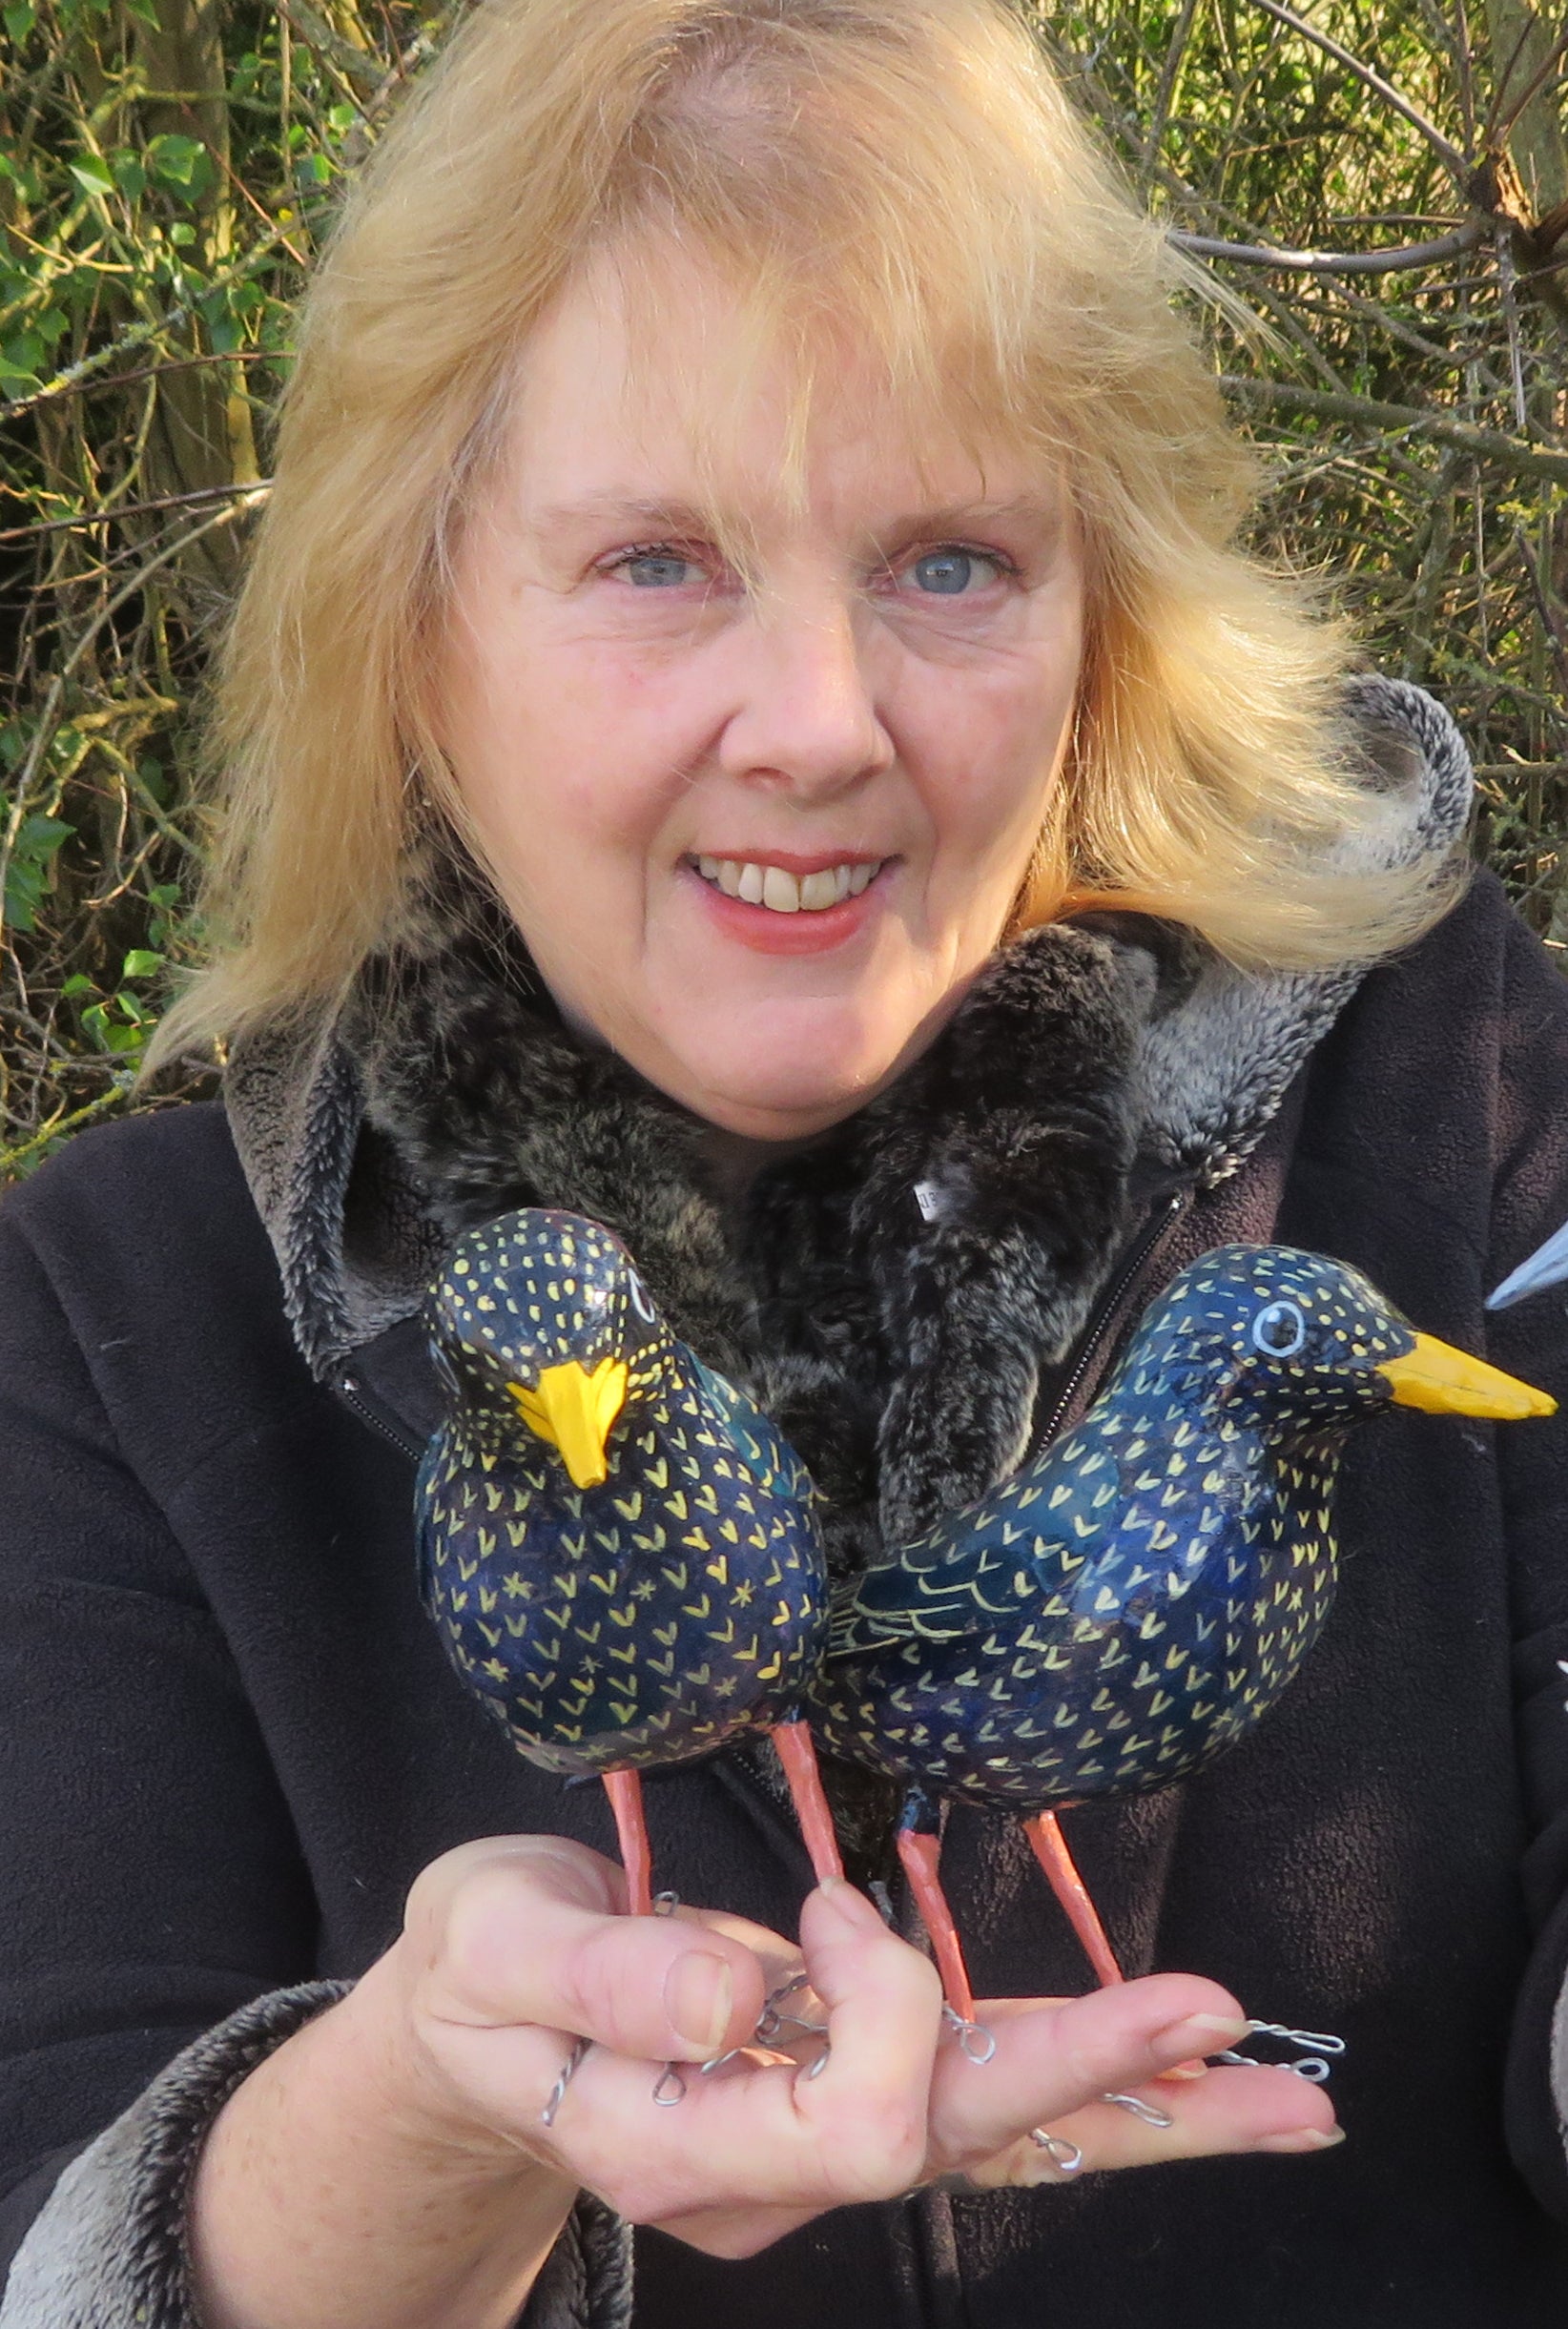 How to make paper mache birds – The Art of Jane Tomlinson